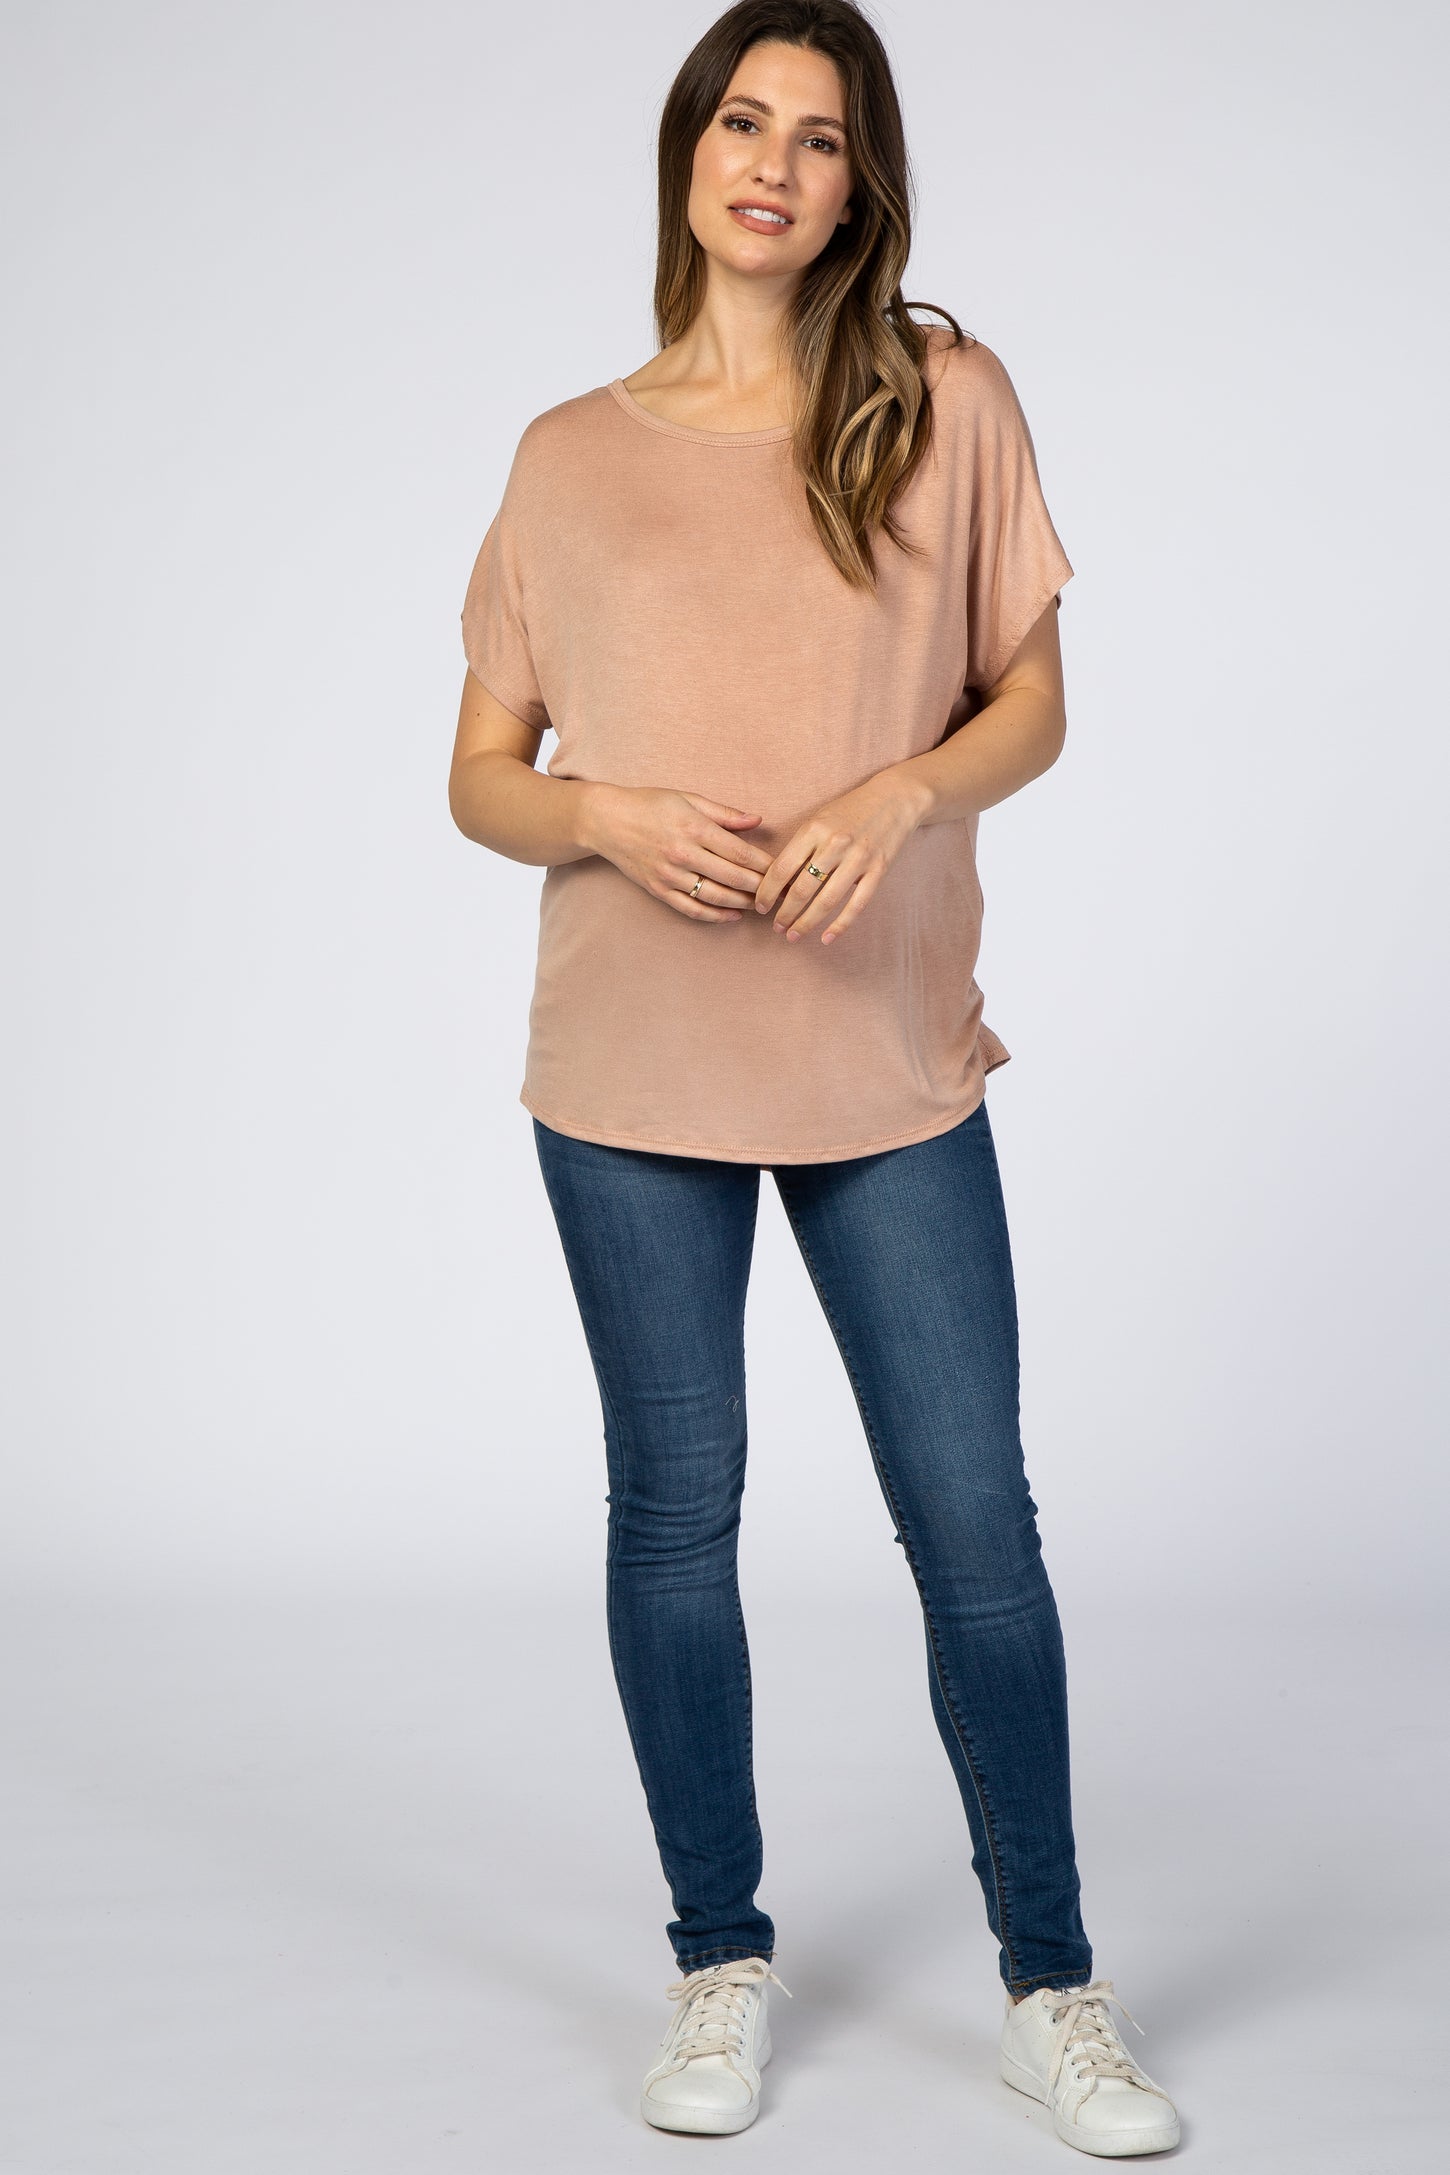 Taupe Cross Back Short Sleeve Maternity Top